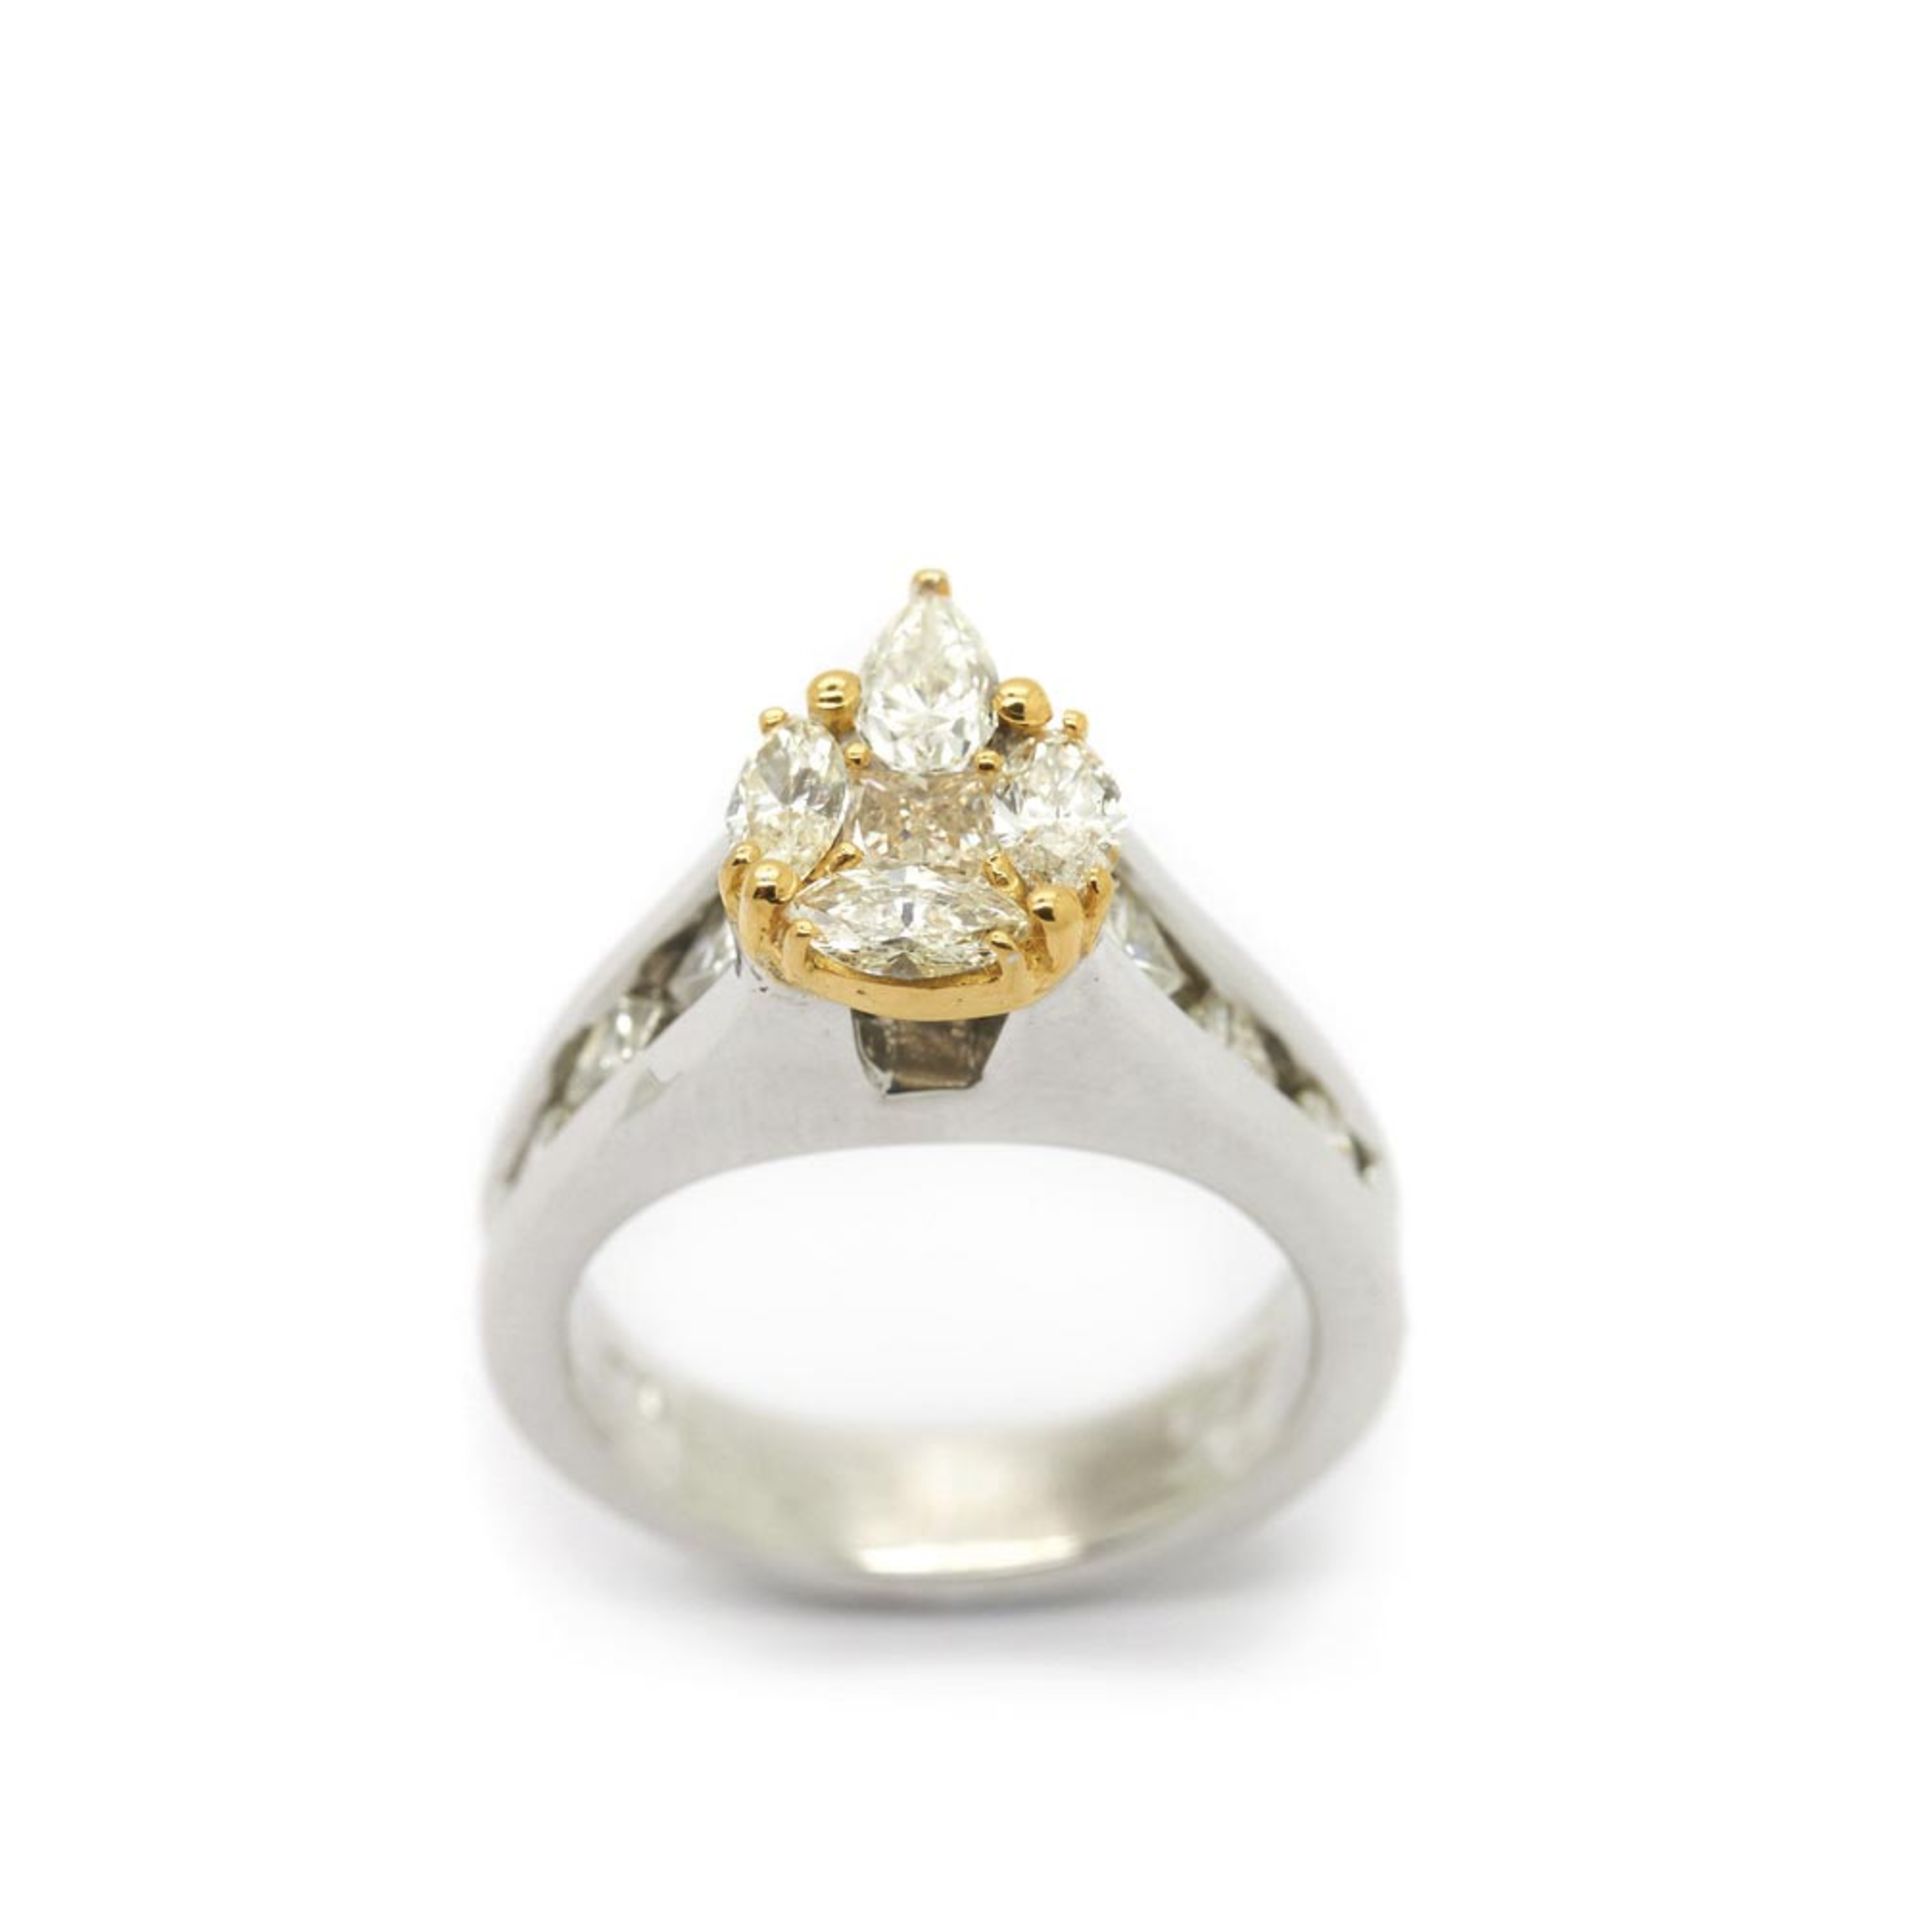 Gold, white gold and diamonds ring